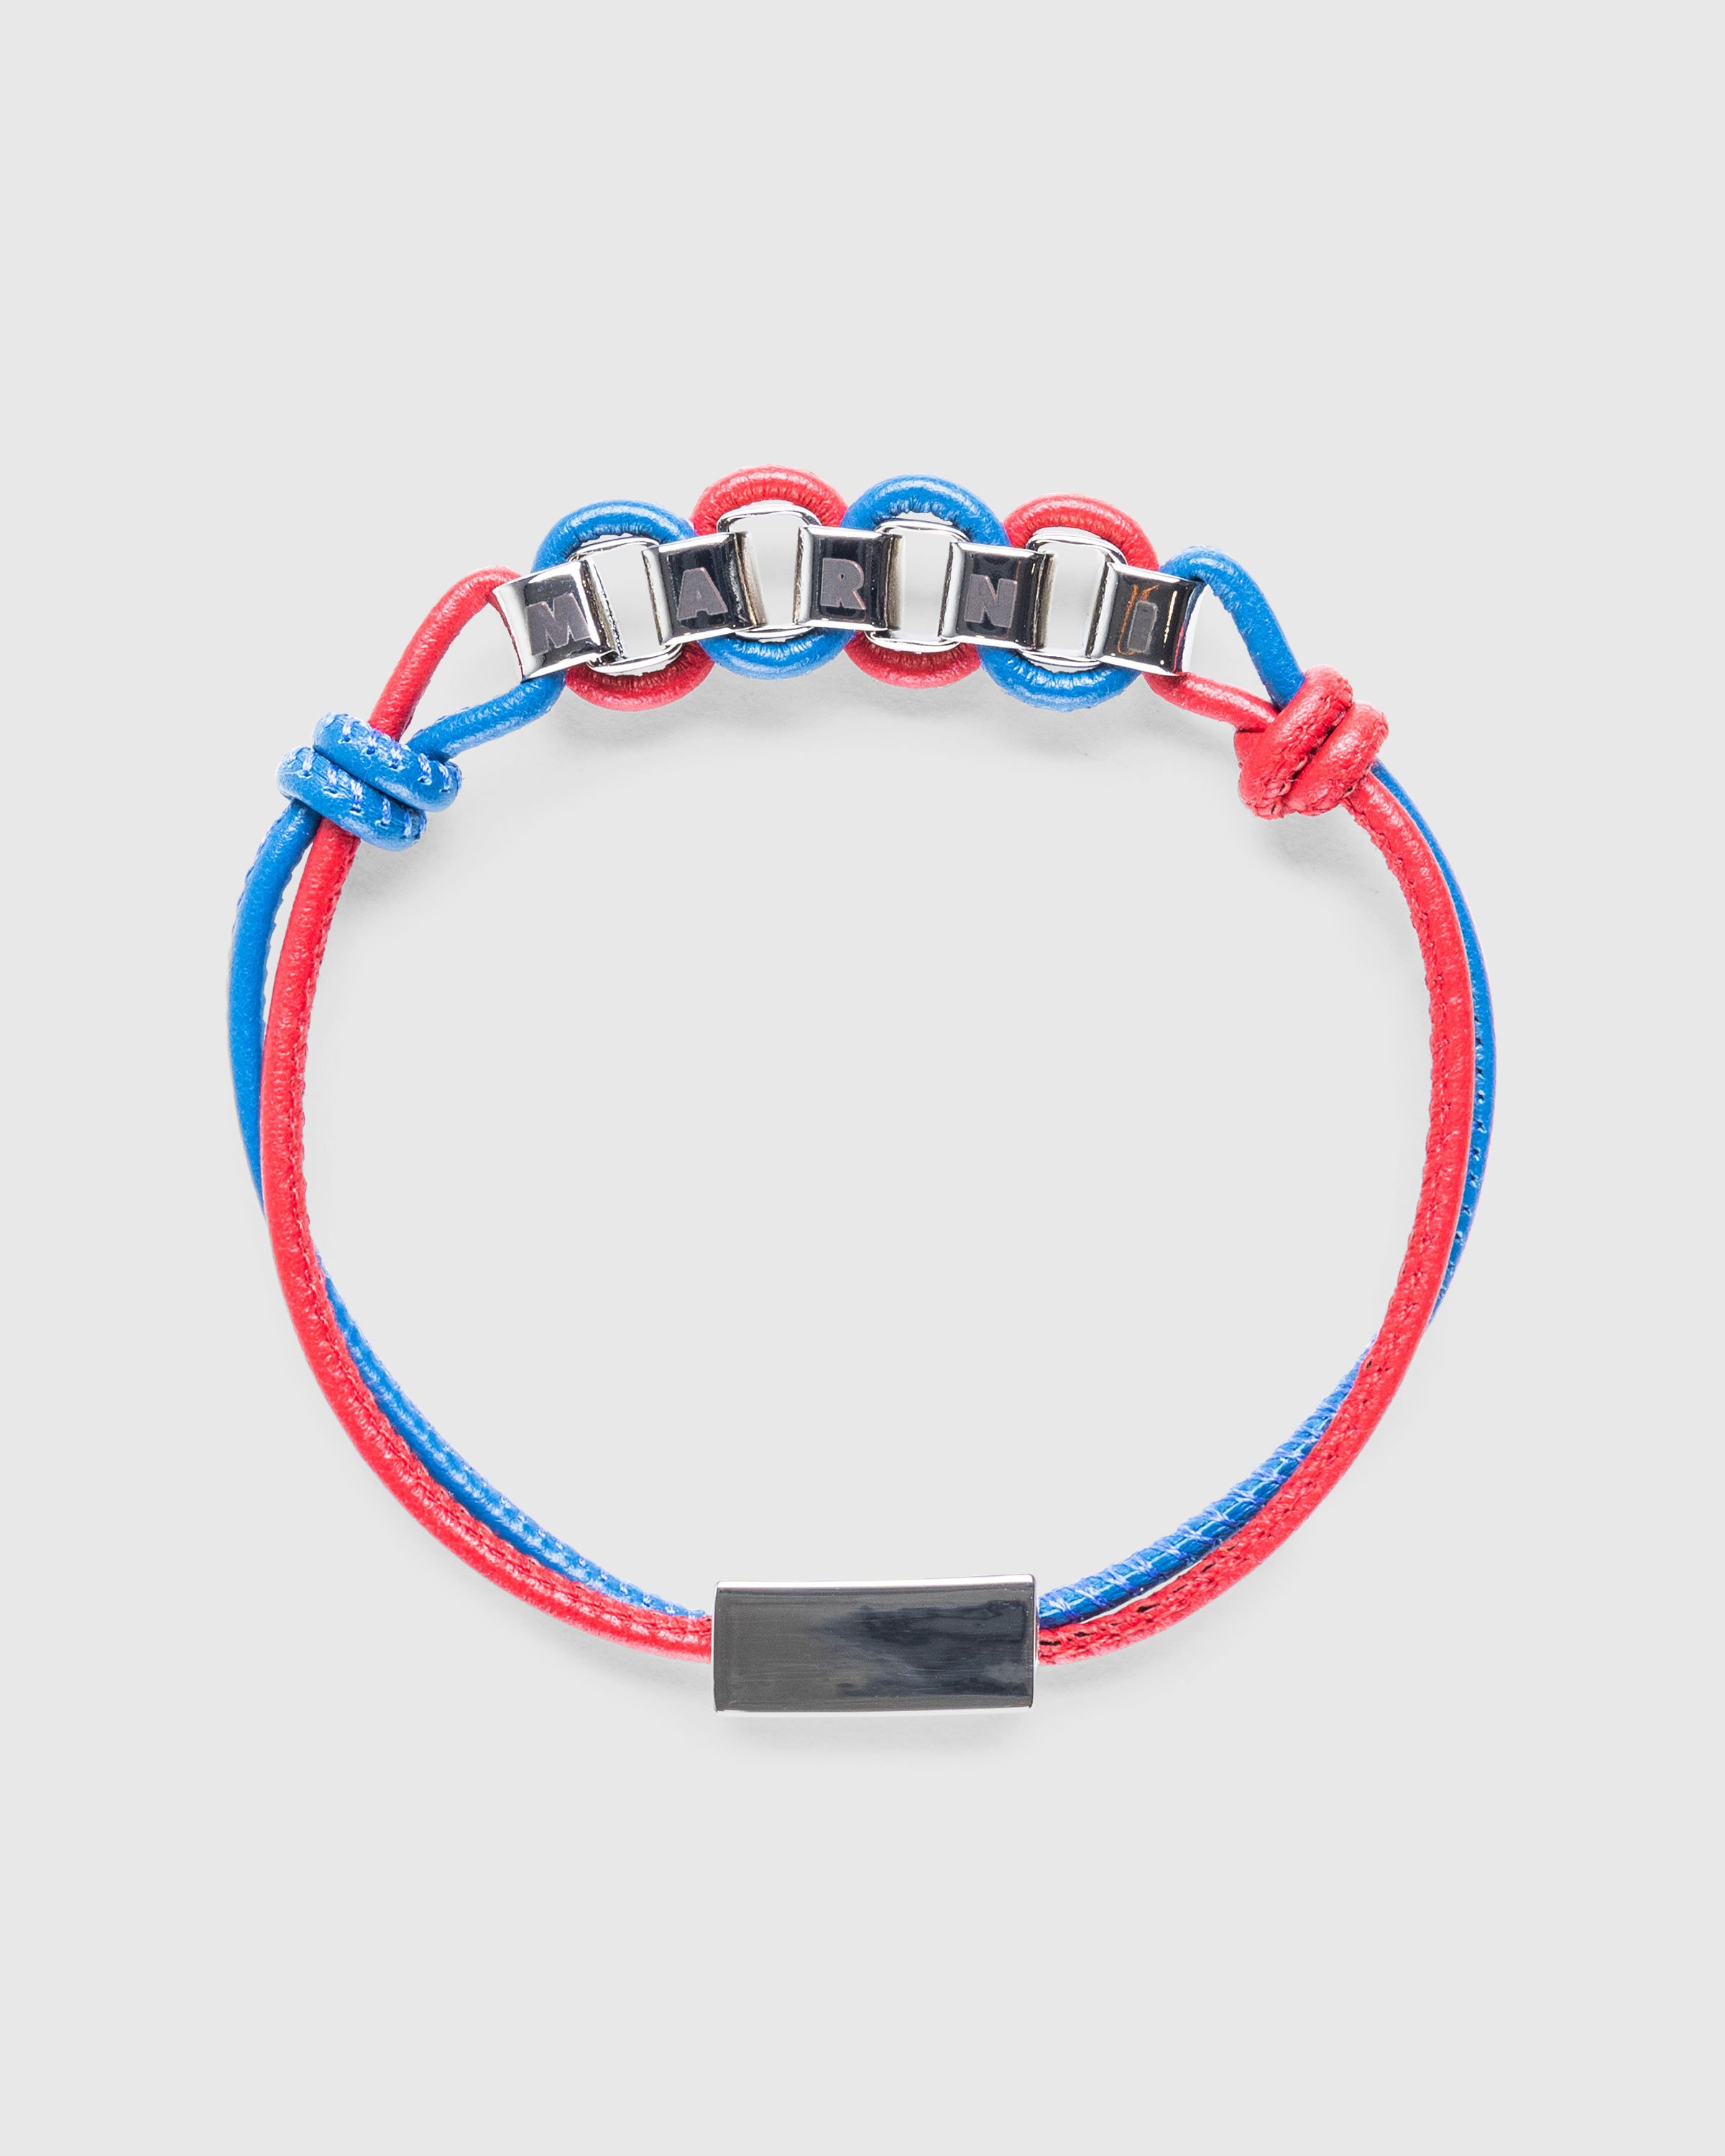 Marni - Logo Chain Leather Bracelet Red/Ocean - Accessories - Multi - Image 1